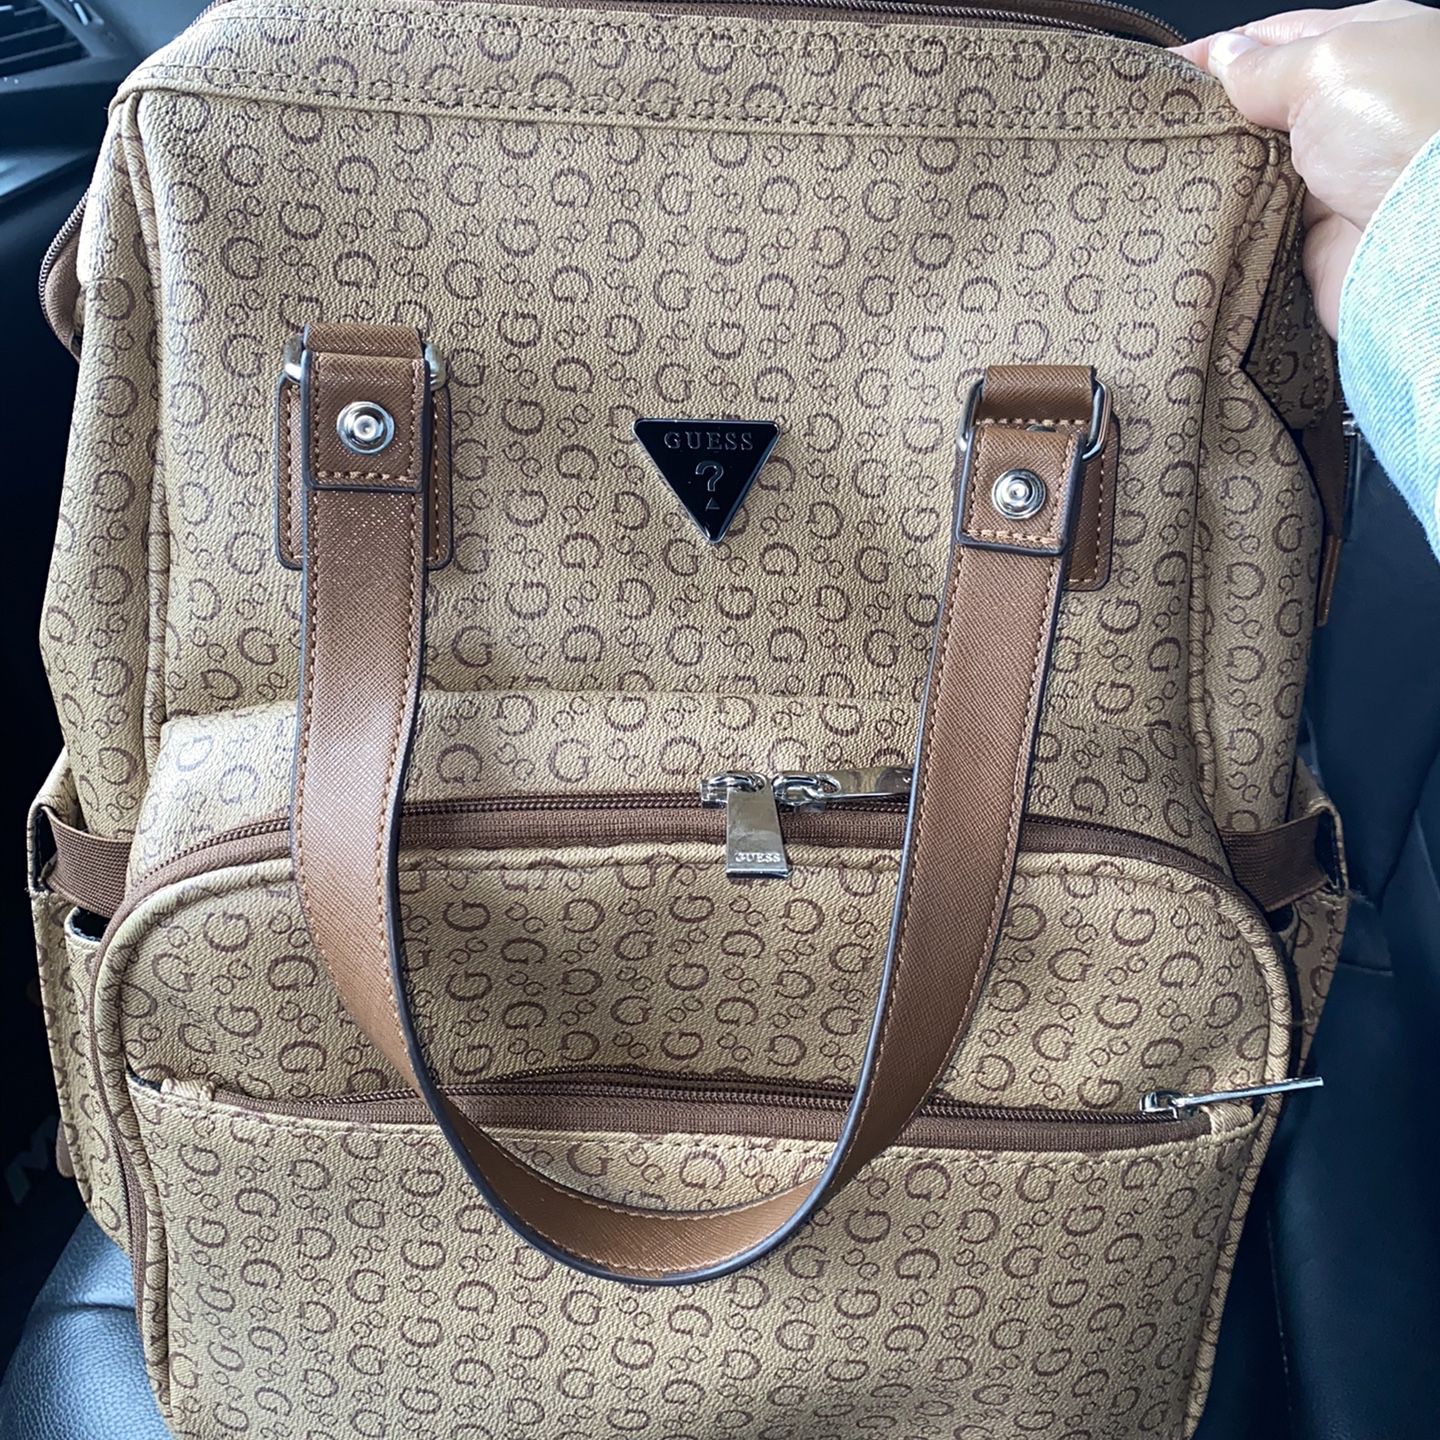 Guess Bags for Sale in Jurupa Valley, CA - OfferUp